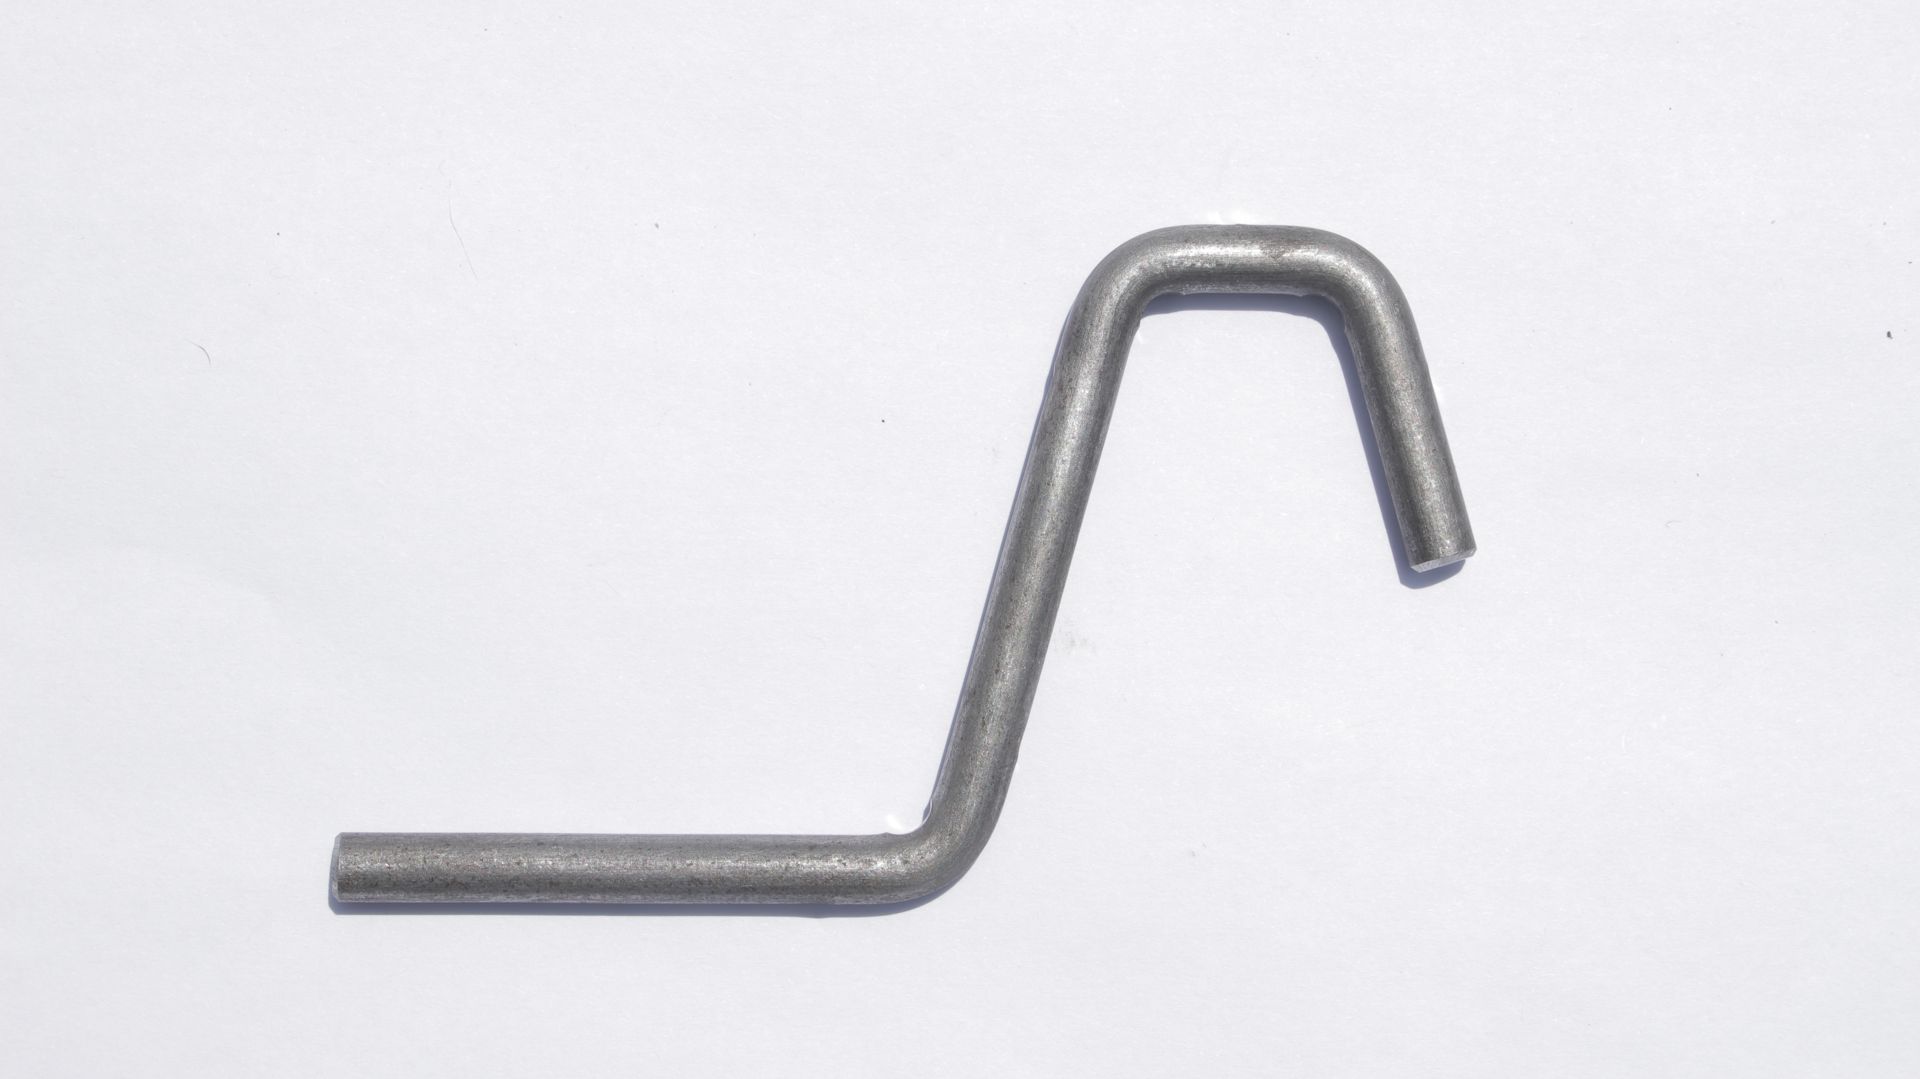 Crib Mattress Support Hook for Jenny Lind Cribs